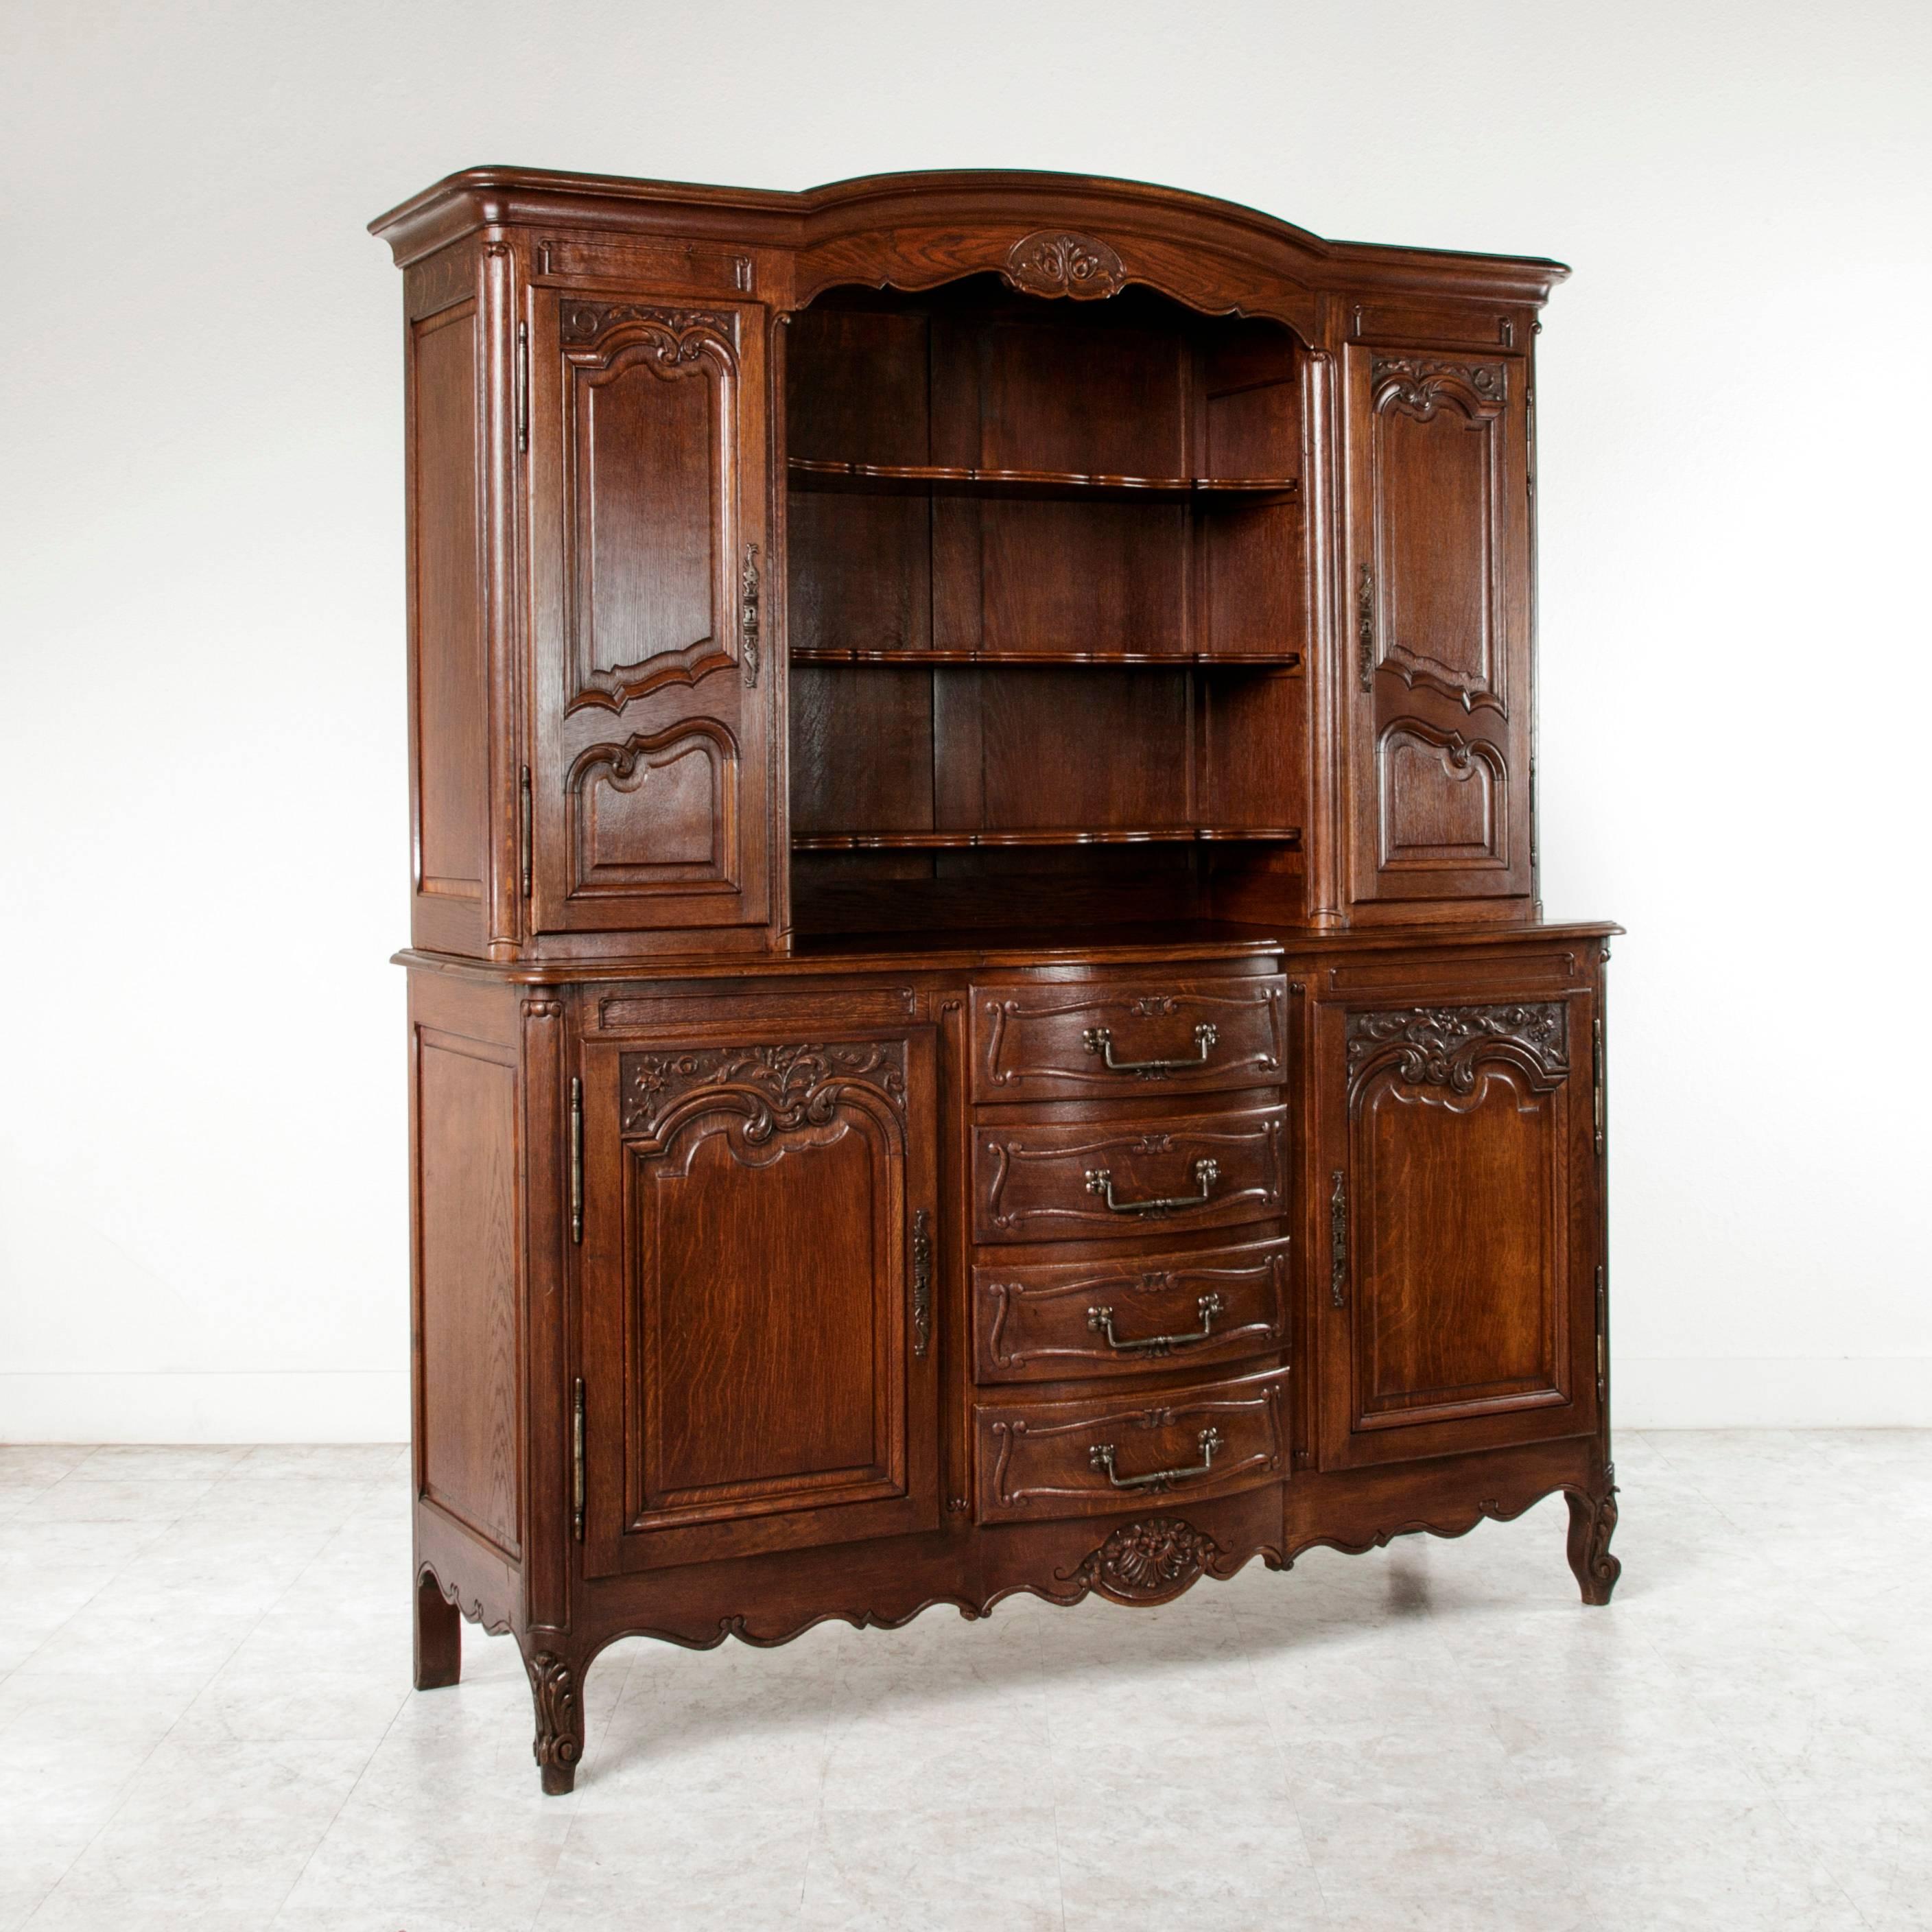 The French vaisselier was the quintessential dining room piece in a French country home. Found in Normandy, France, this early twentieth century Louis XV style oak vaisselier or buffet deux corps features solid panelled sides, a bonnet top, and four